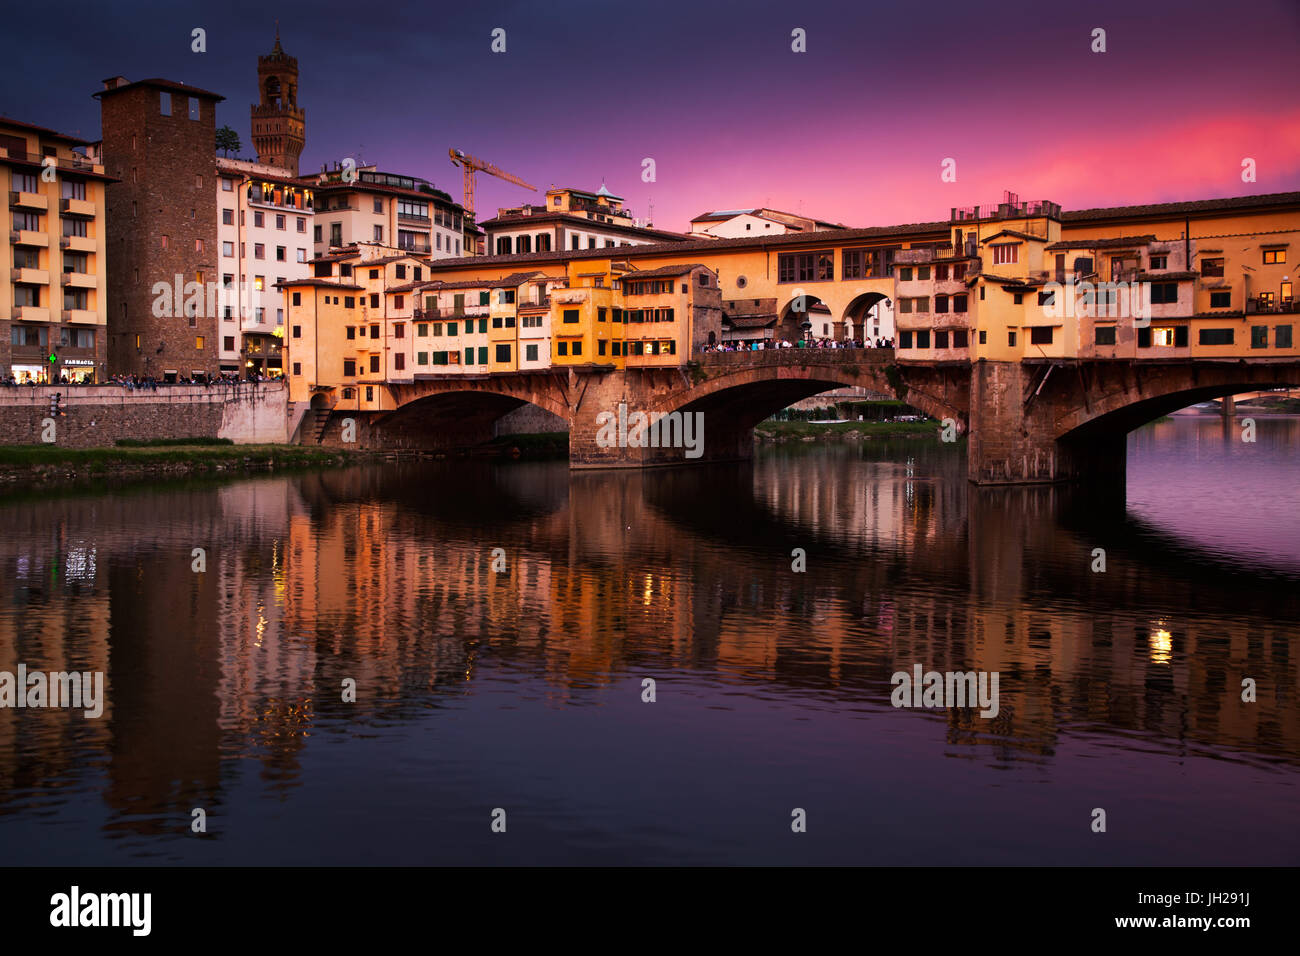 Ponte Vecchio at sunset reflected in the River Arno, Florence, UNESCO World Heritage Site, Tuscany, Italy, Europe Stock Photo